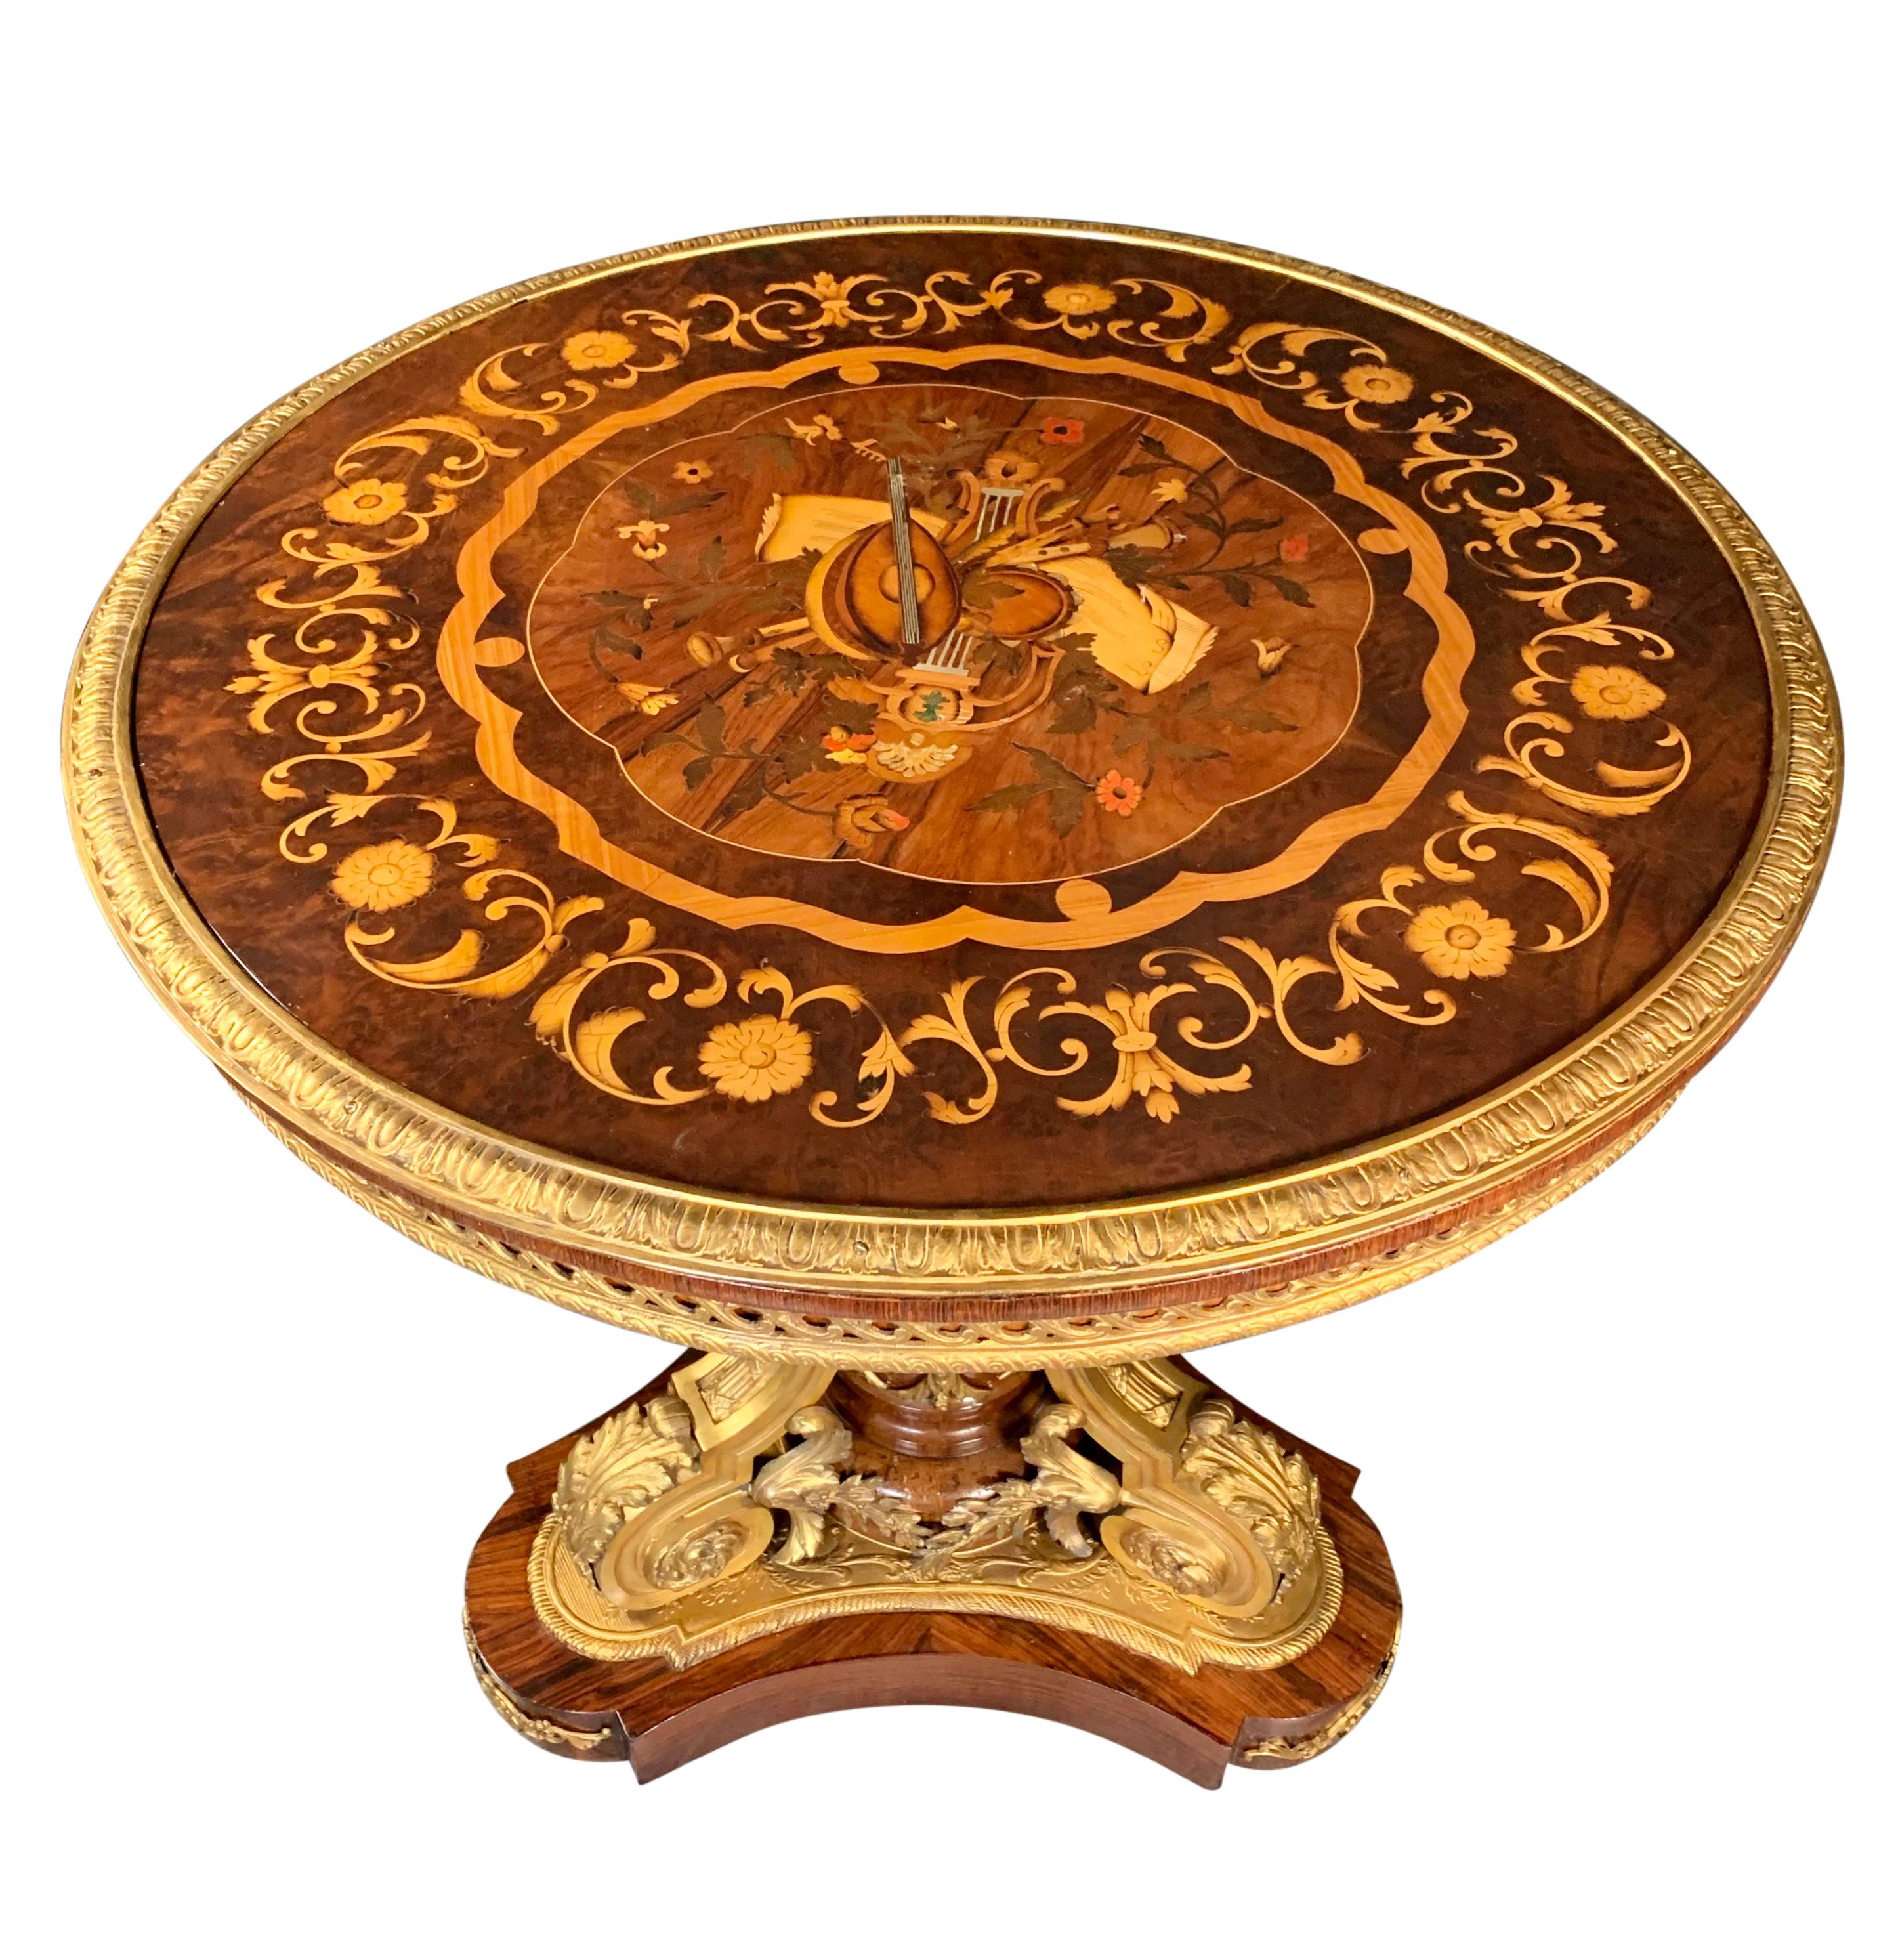 A FRENCH LOUIS XV STYLE ORMOLU MOUNTED & MARQUETRY CIRCULAR CENTER TABLE

France, Circa 1900

In the Louis XVI style the marquetry inlaid circular top decorated with exotic woods depicting musical instruments and foliage and bordered with a garland